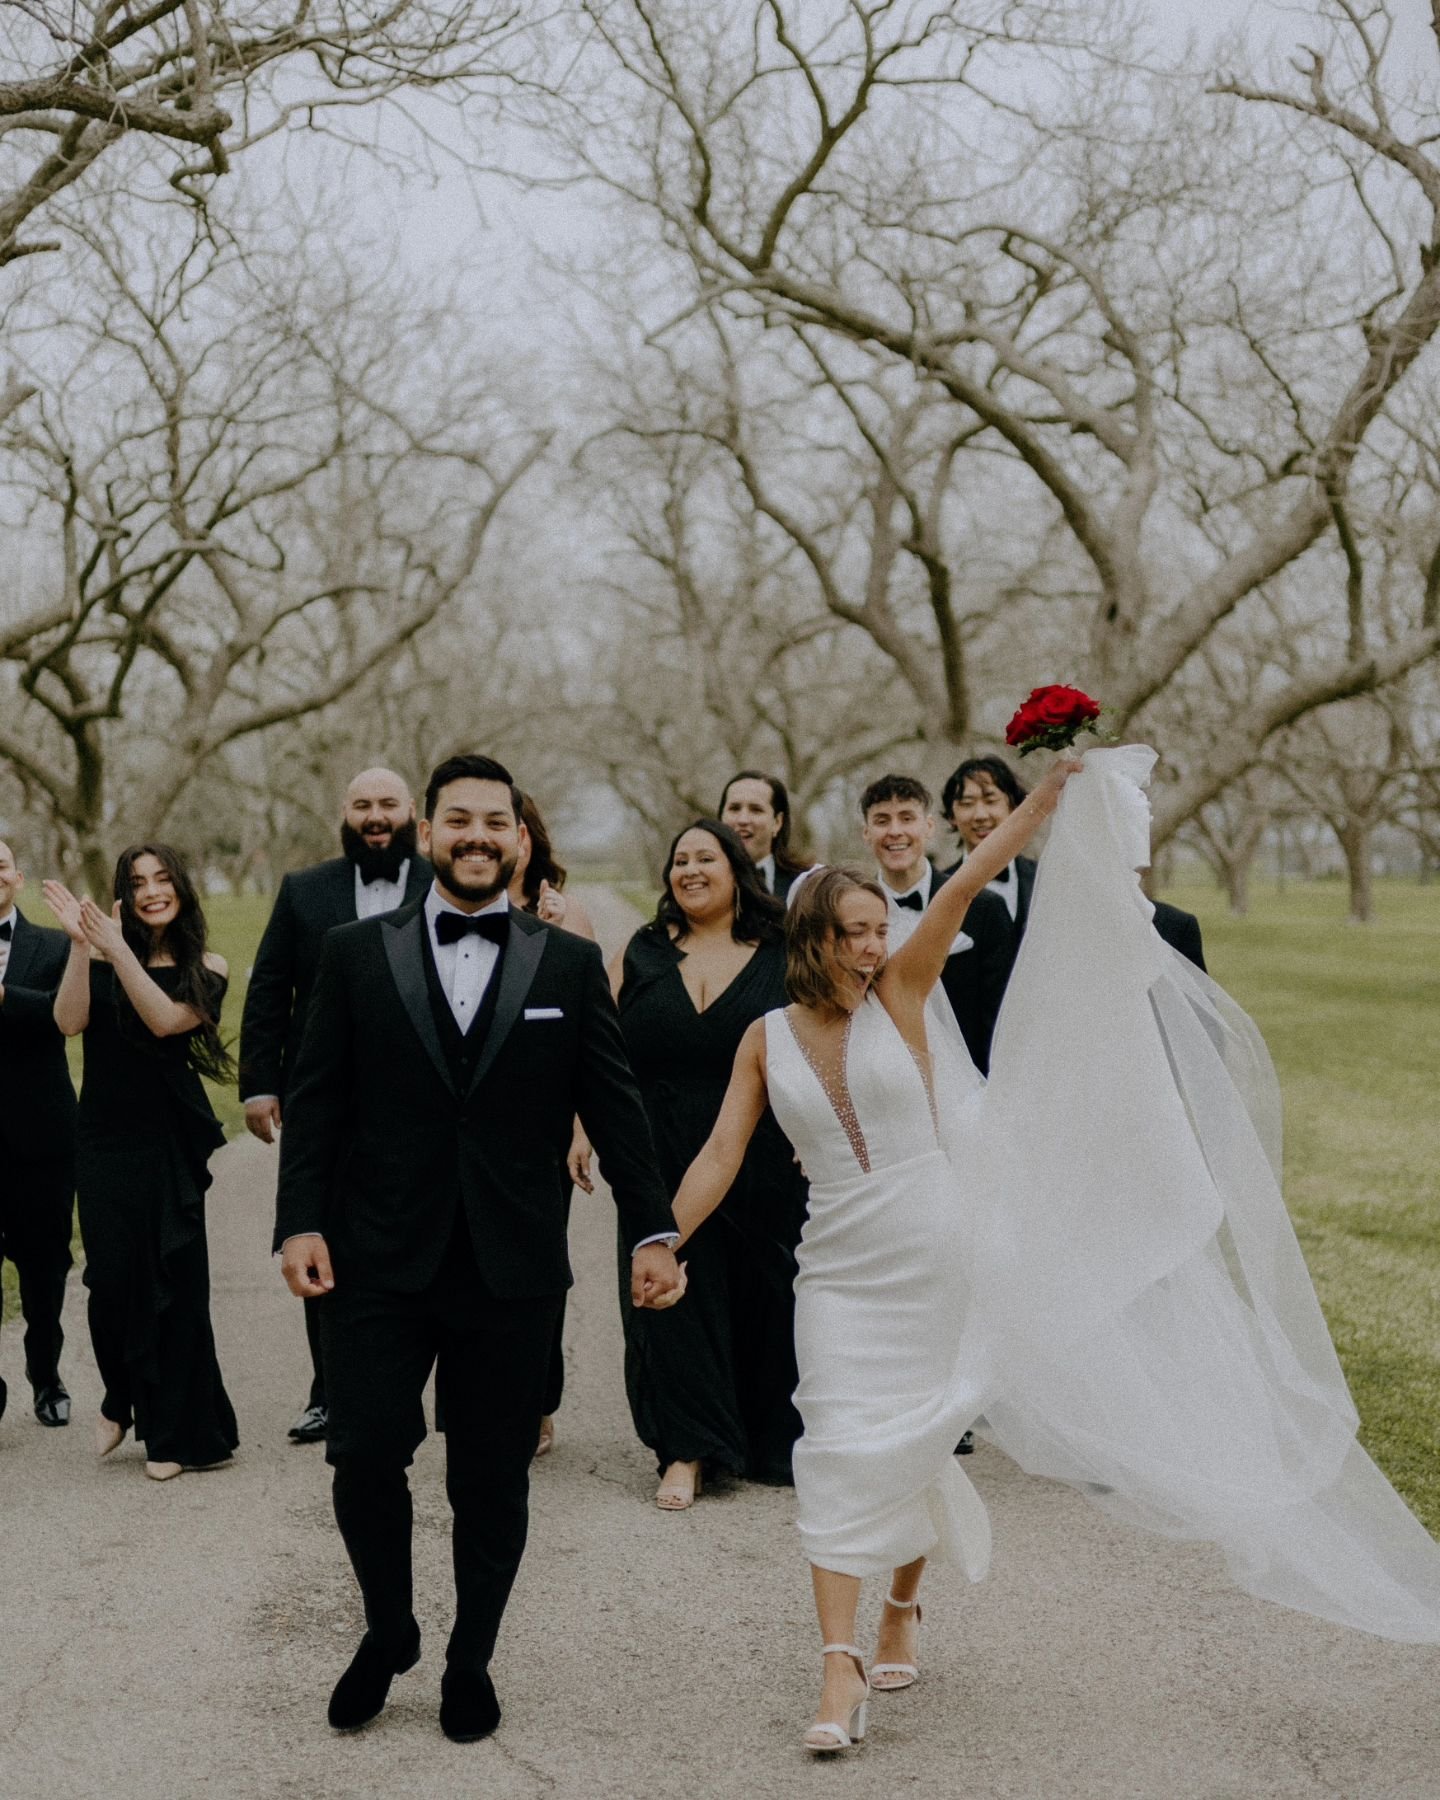 Imagine you get married on leap day 🌹 

You walk yourselves down the aisle &amp; party with your besties. It was almost impossible to narrow down this count for Hannah &amp; Javier. Can't wait for your anniversary in 4 years 🫶🤣